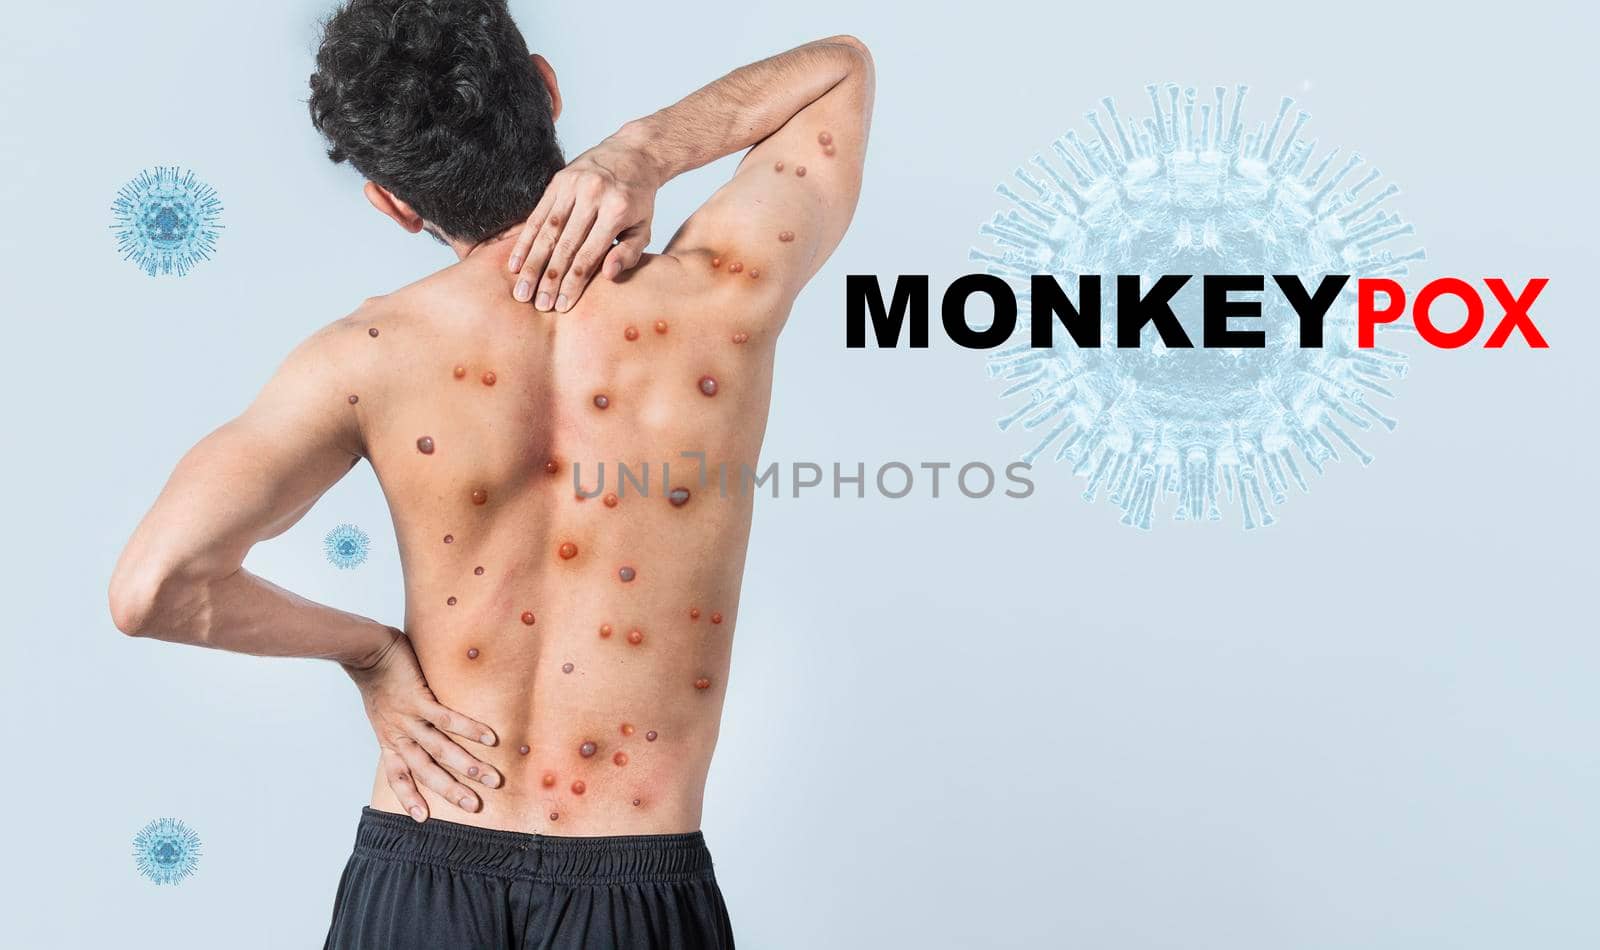 People with monkeypox on isolated background, A person from back with monkeypox on his body, Monkeypox virus concept, Monkeypox virus outbreak pandemic design